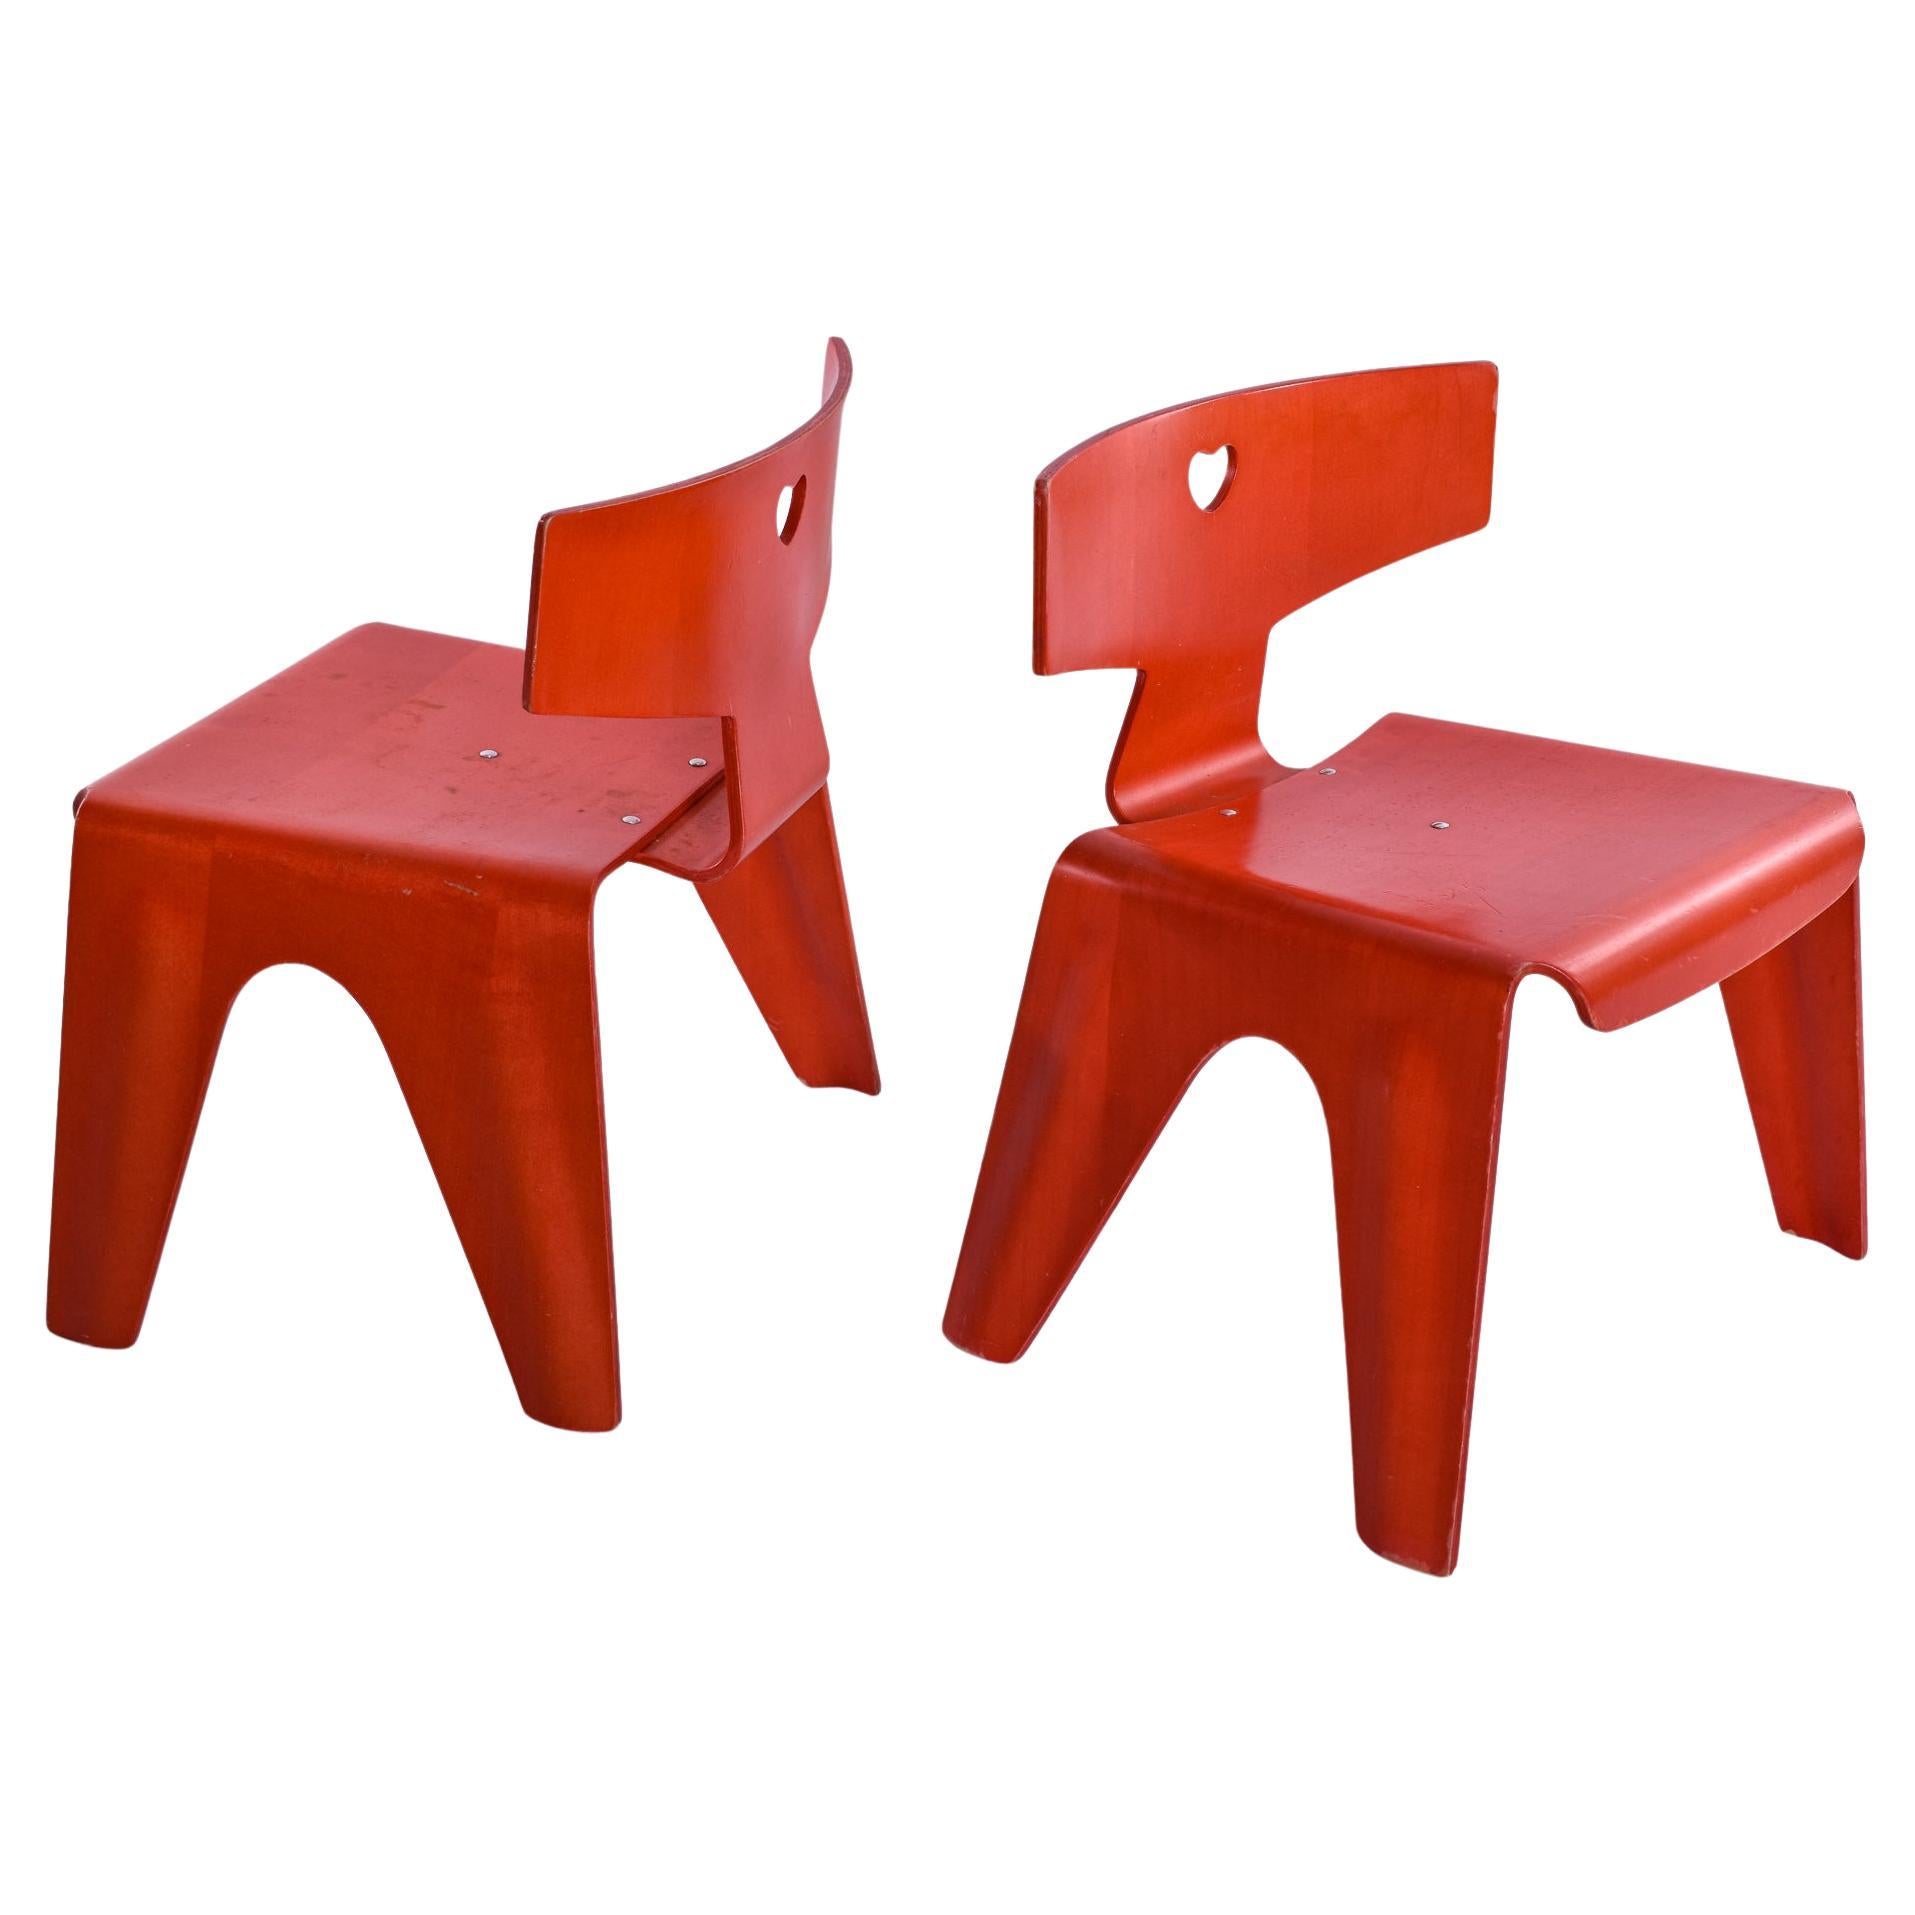 Charles and Ray Eames Children's Chairs, 2004